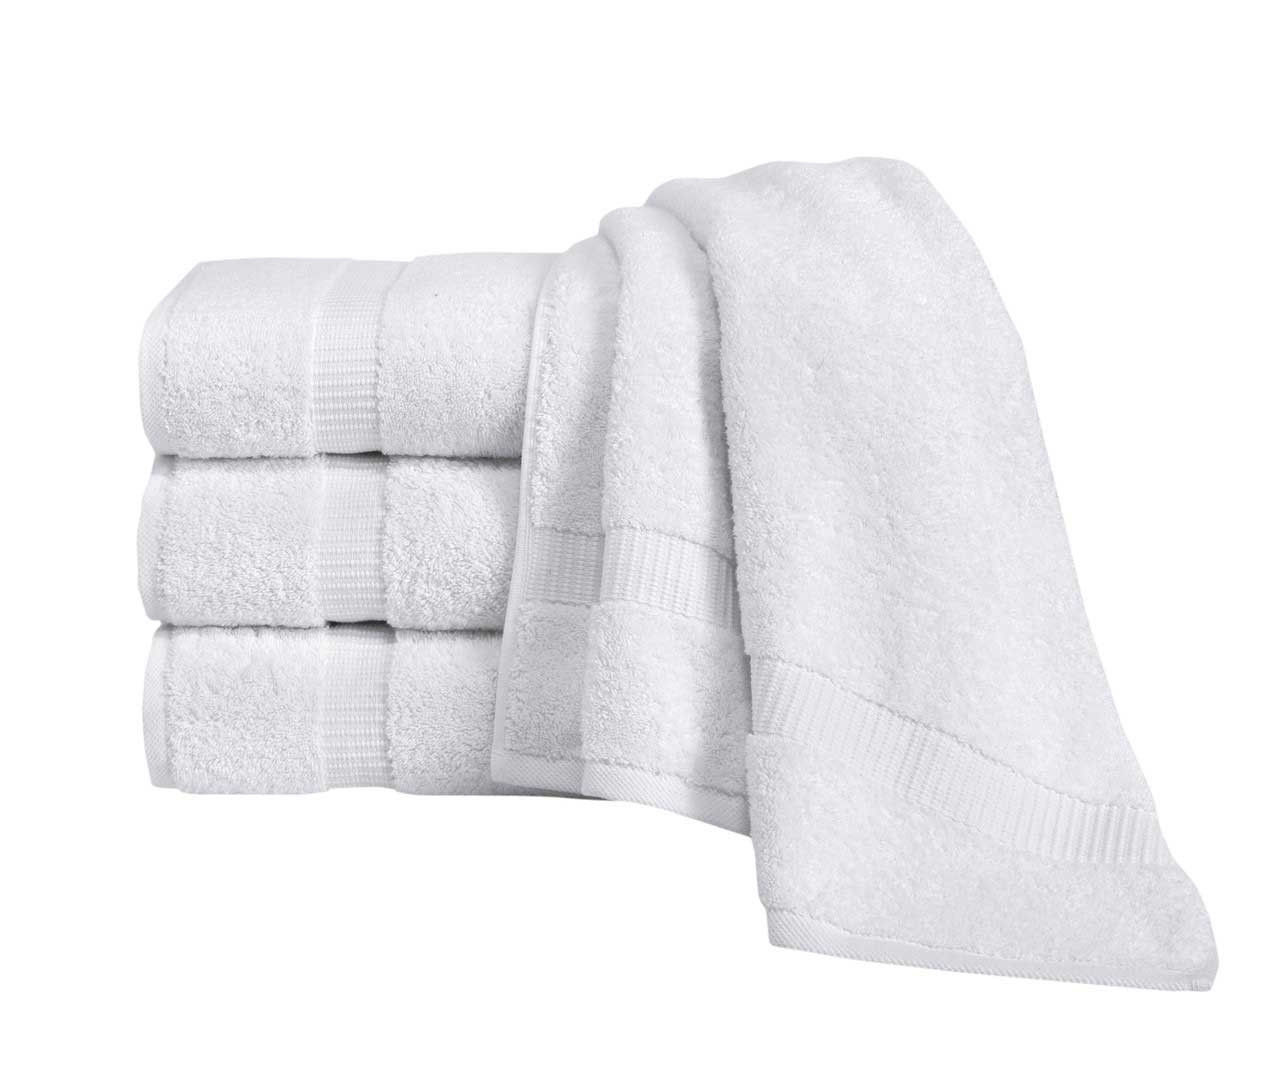 What material is the White Royal Turkish Towels Villa Collection made from?